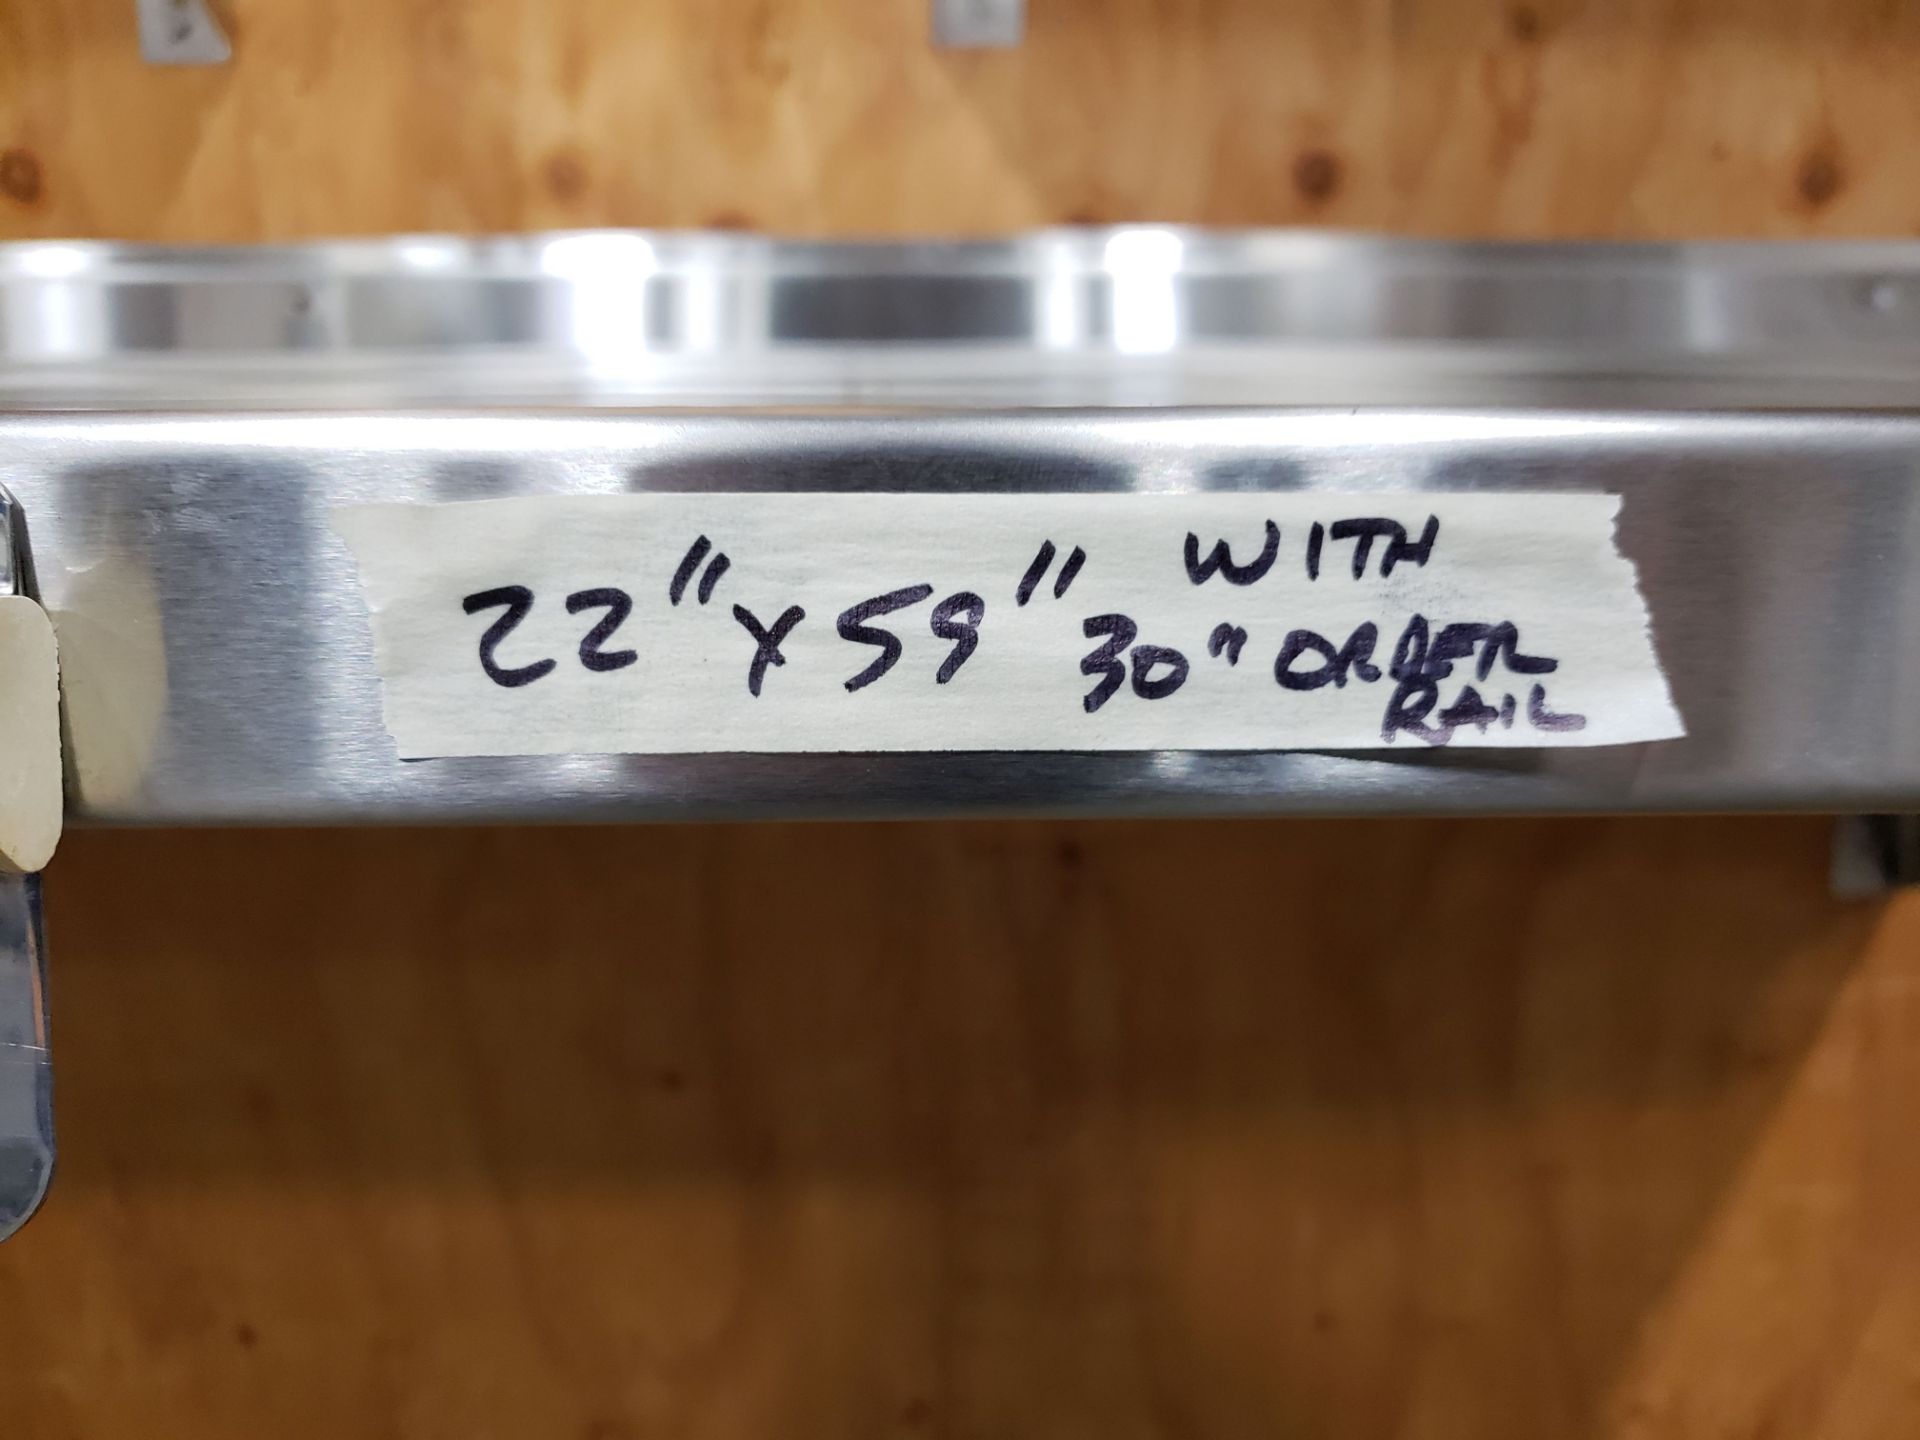 22" x 59" Stainless Steel Wall Shelf with 30" Order Rail - Image 3 of 3